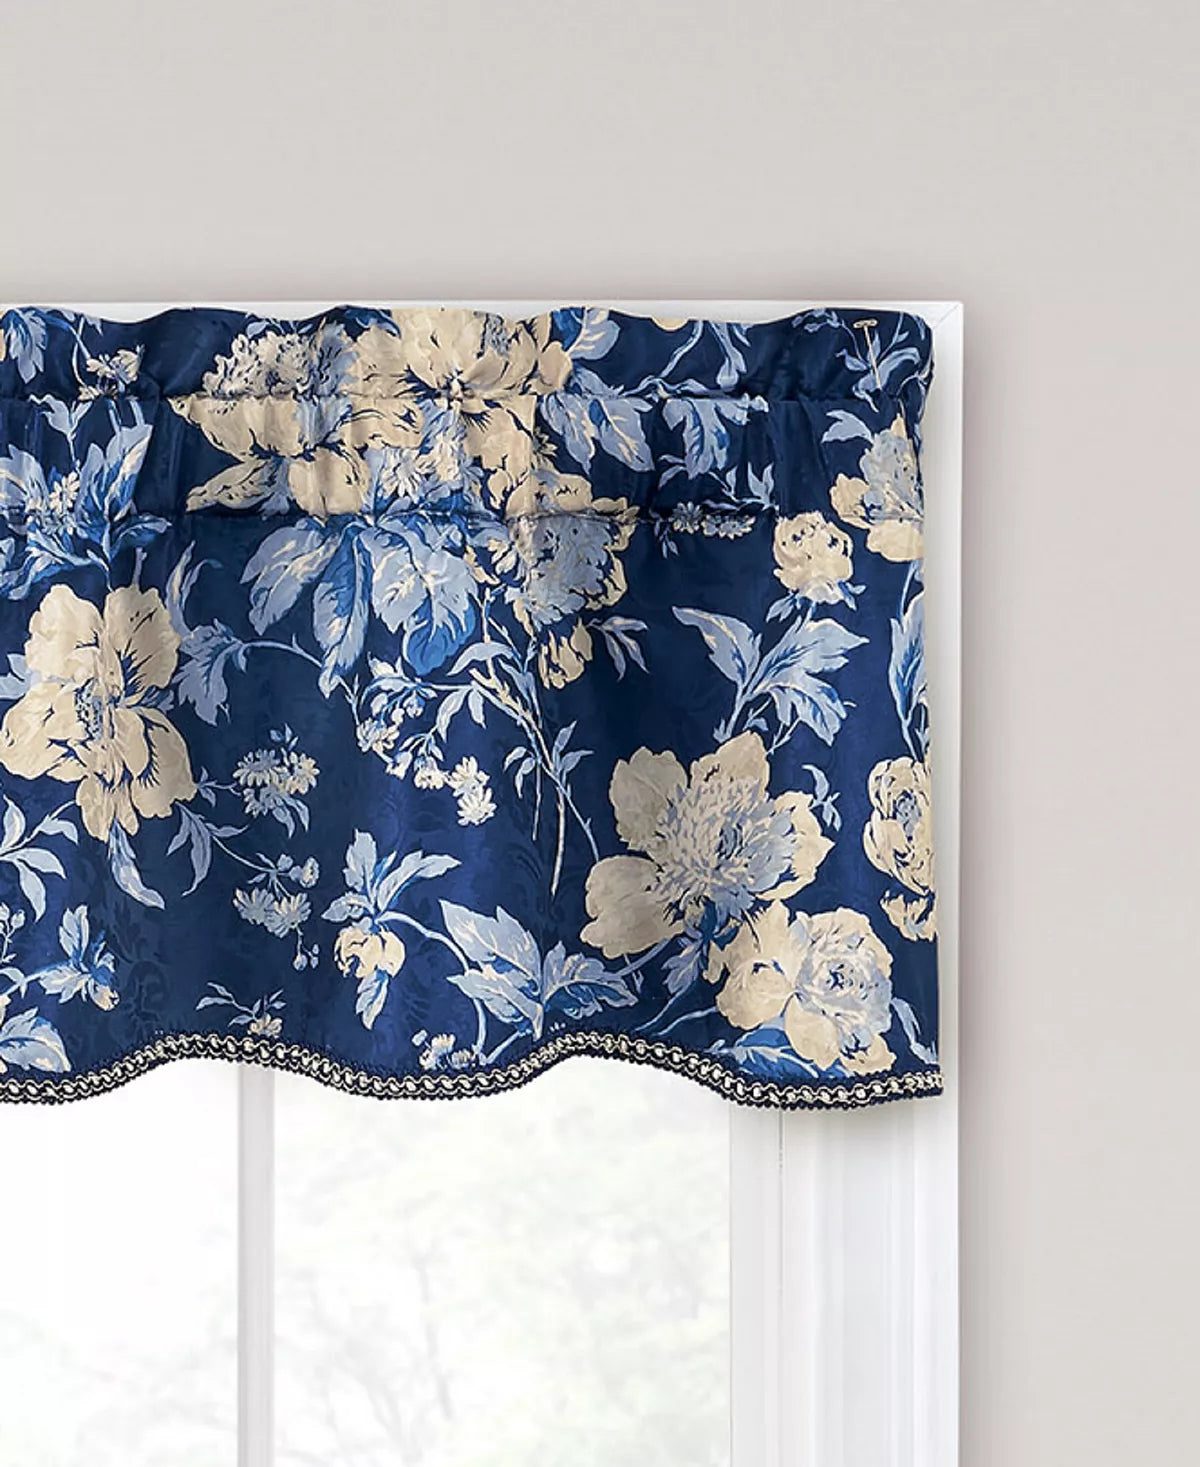 SET OF 2 Forever Yours 52" x 16" Scallop Valances